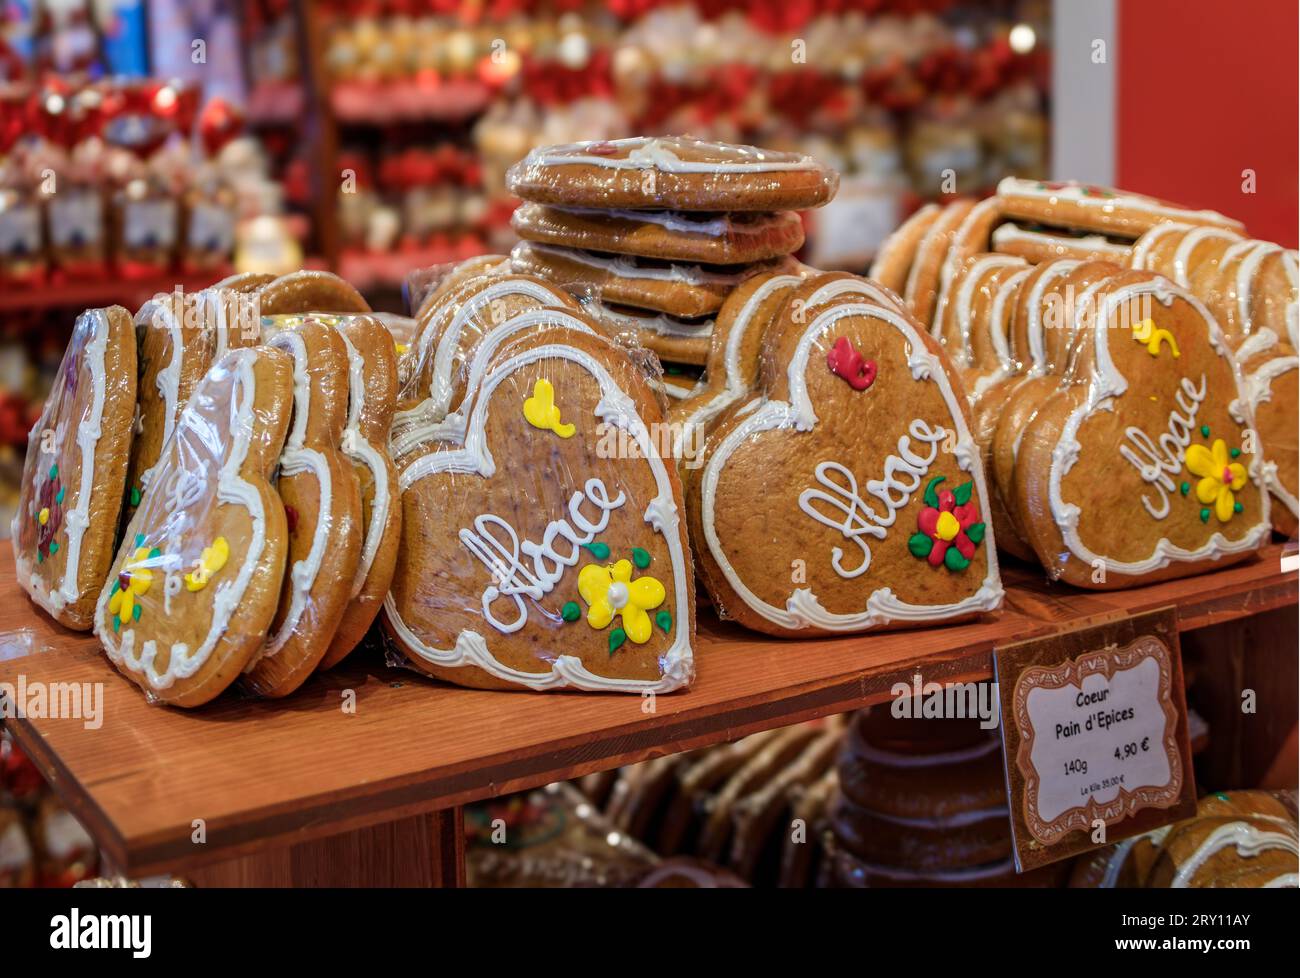 Strasbourg, France - May 31, 2023: Traditional artisanal handmade gingerbread cookies on display at a store in old town on Grande Ile, historic center Stock Photo